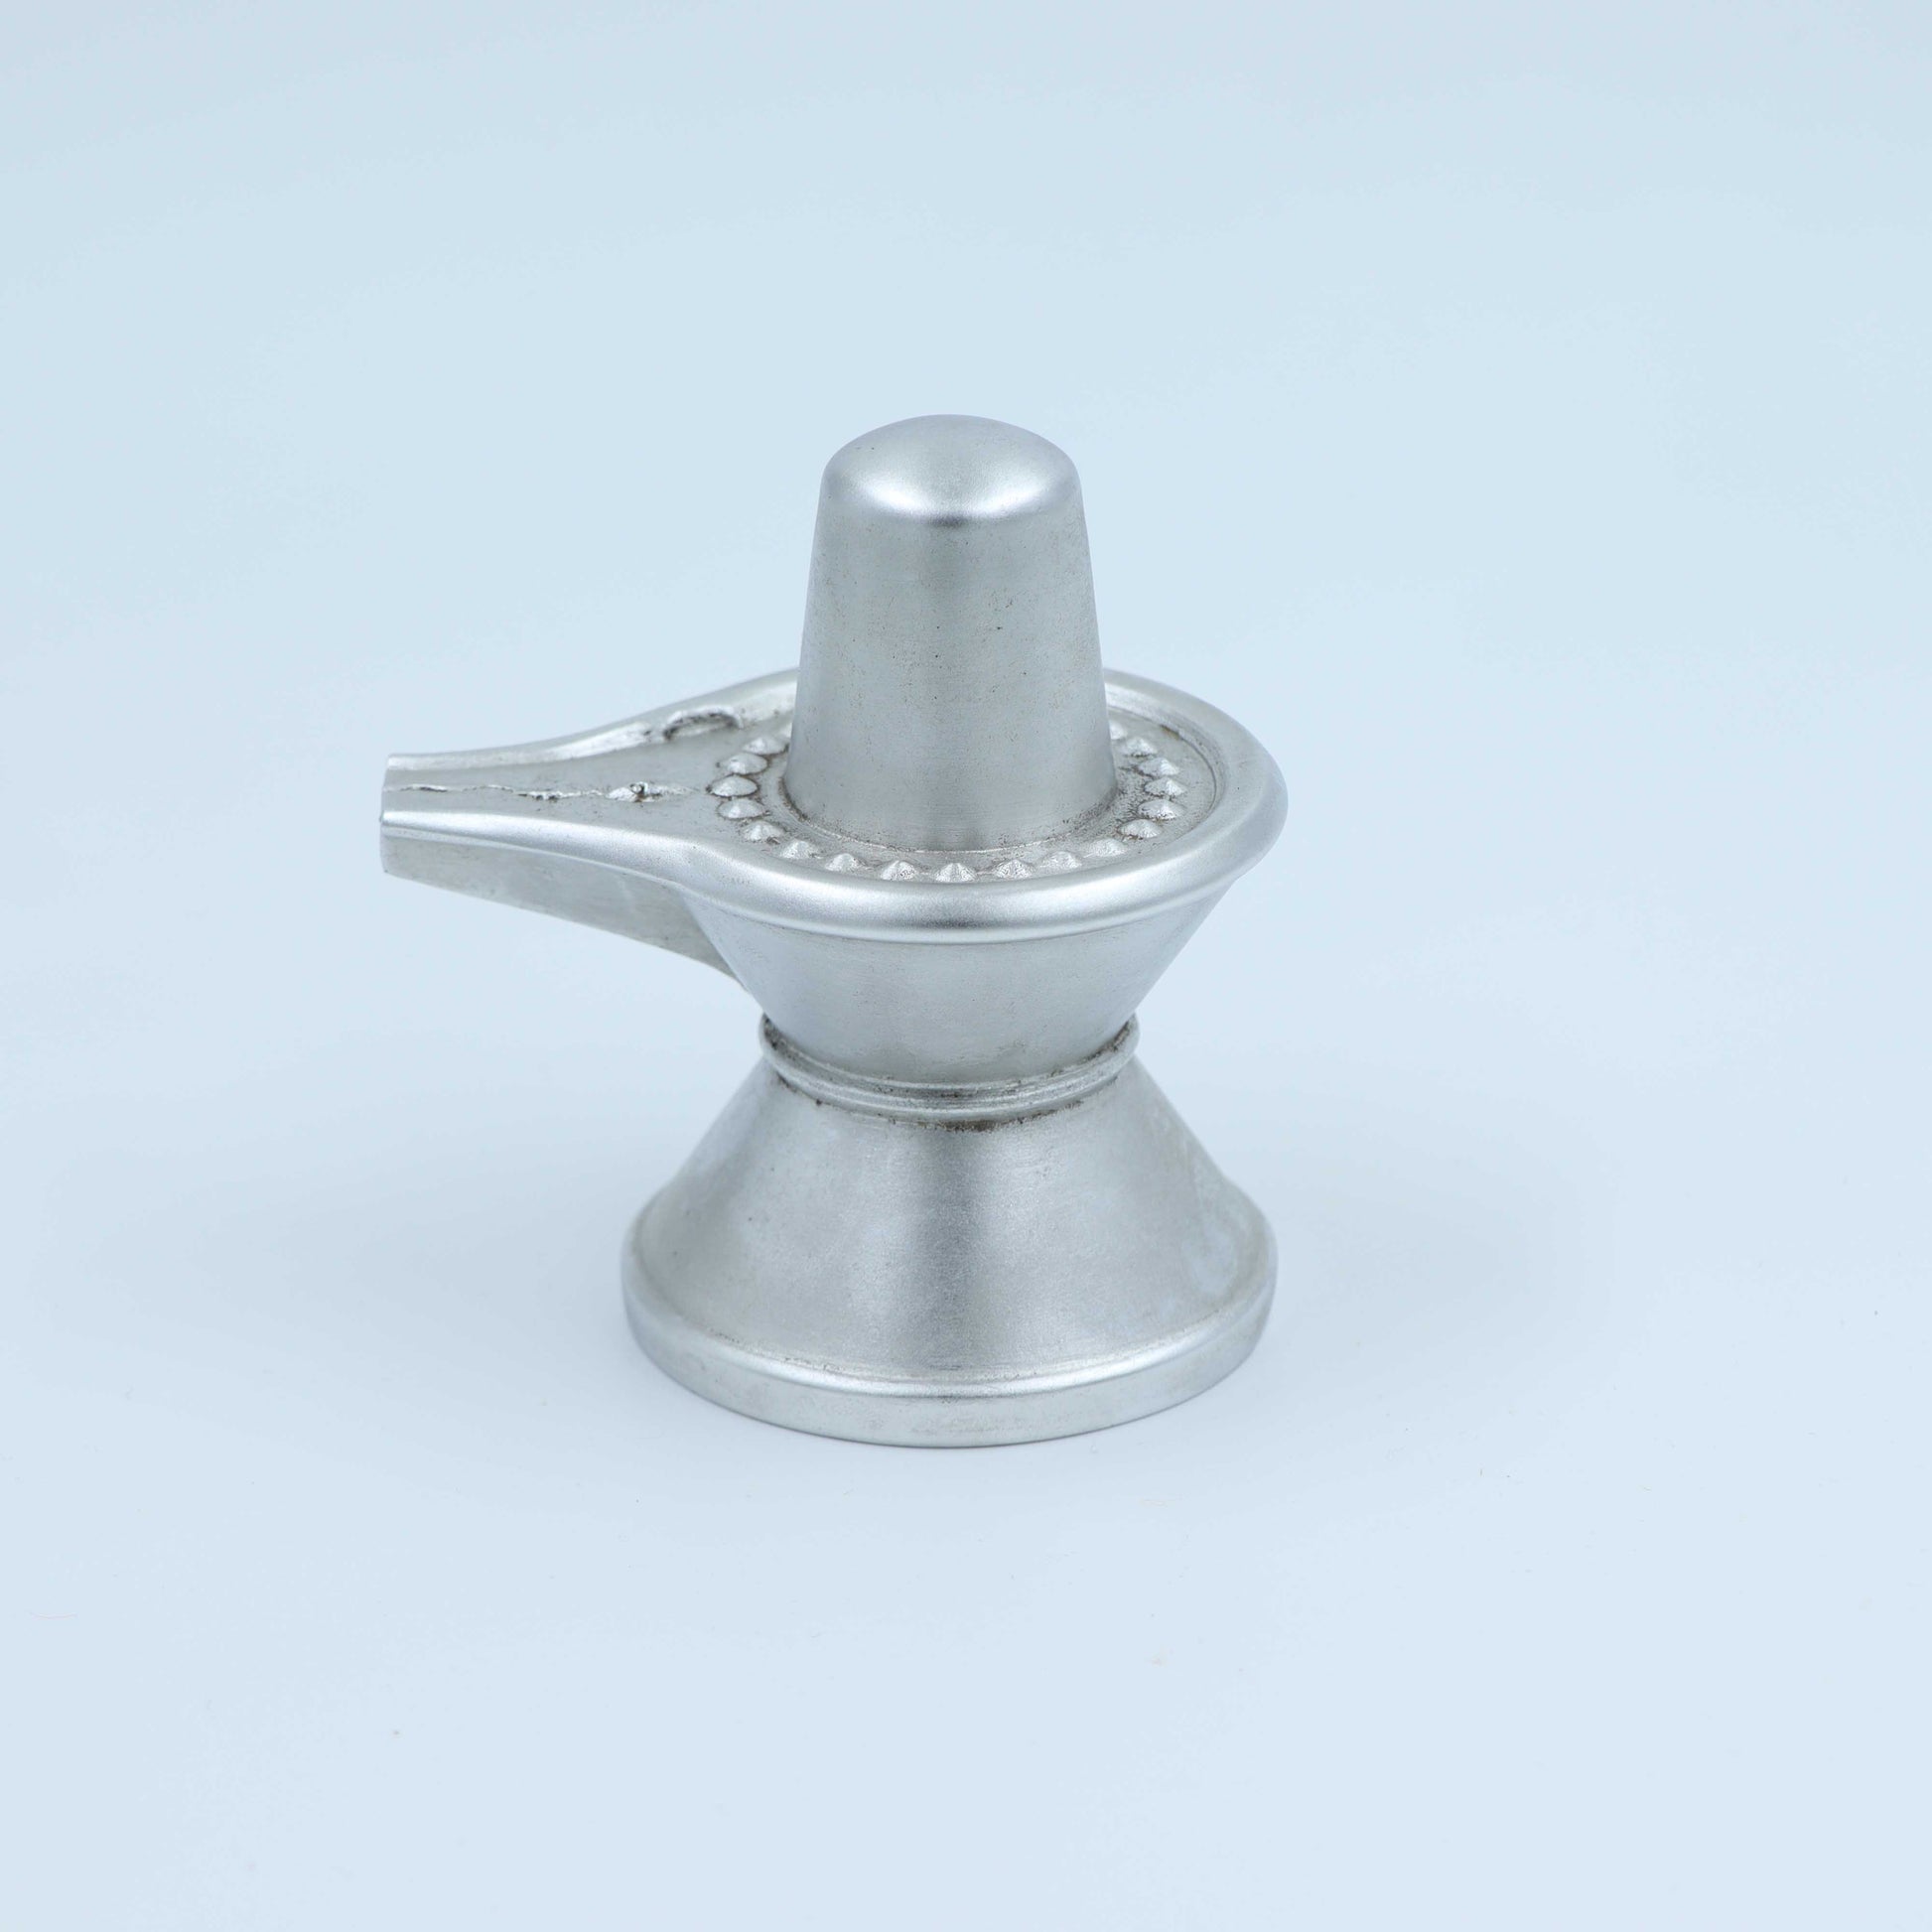 Shivling Figurine for puja